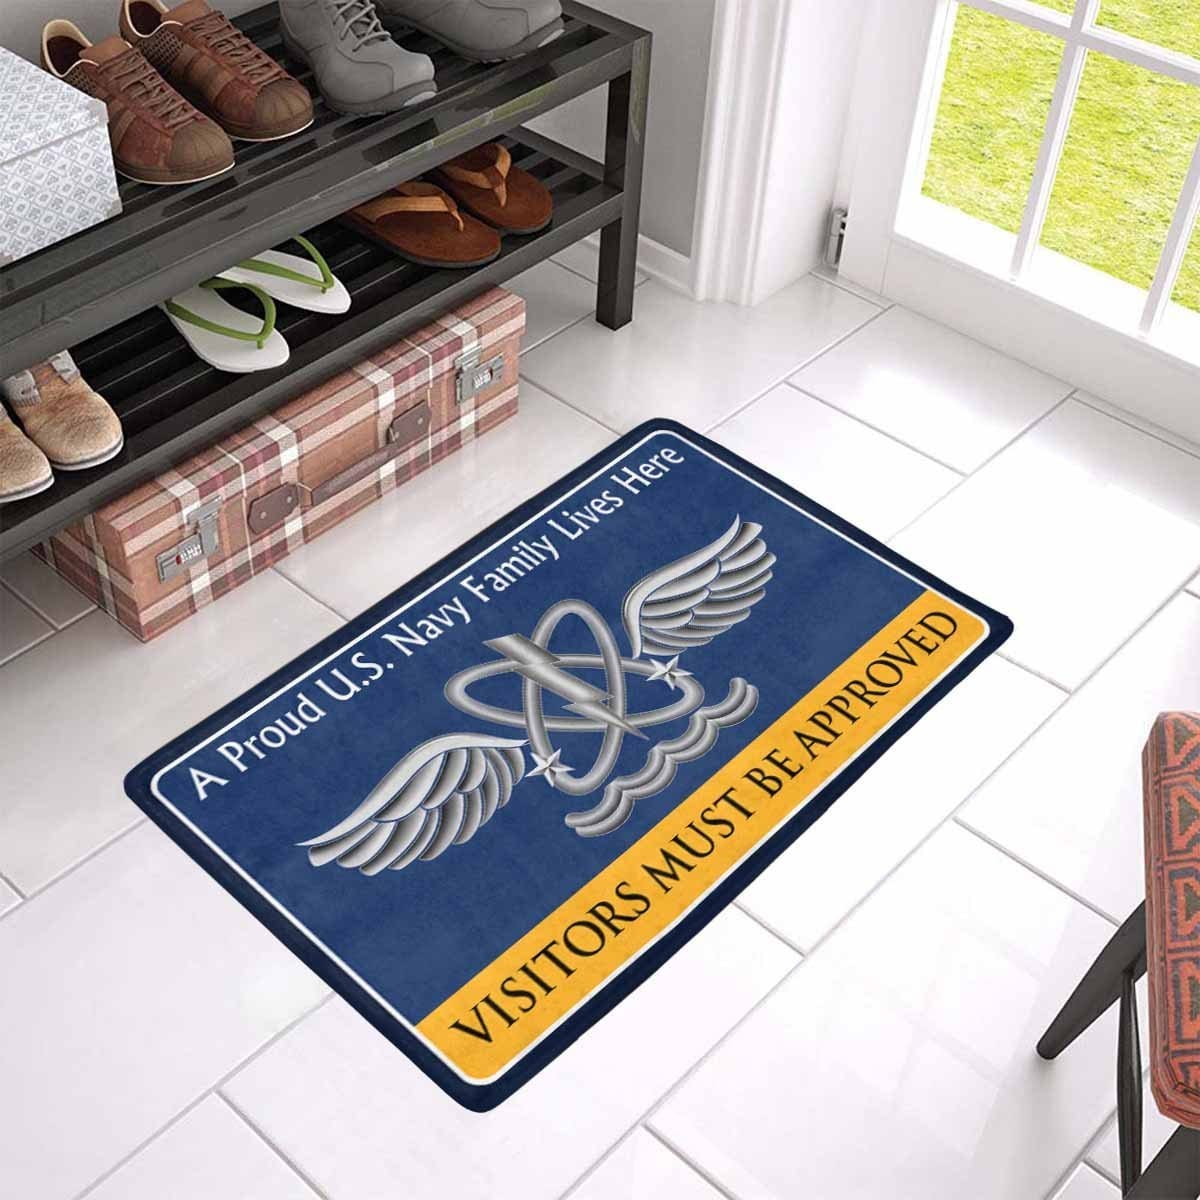 U.S Navy Naval aircrewman Navy AW Family Doormat - Visitors must be approved (23,6 inches x 15,7 inches)-Doormat-Navy-Rate-Veterans Nation